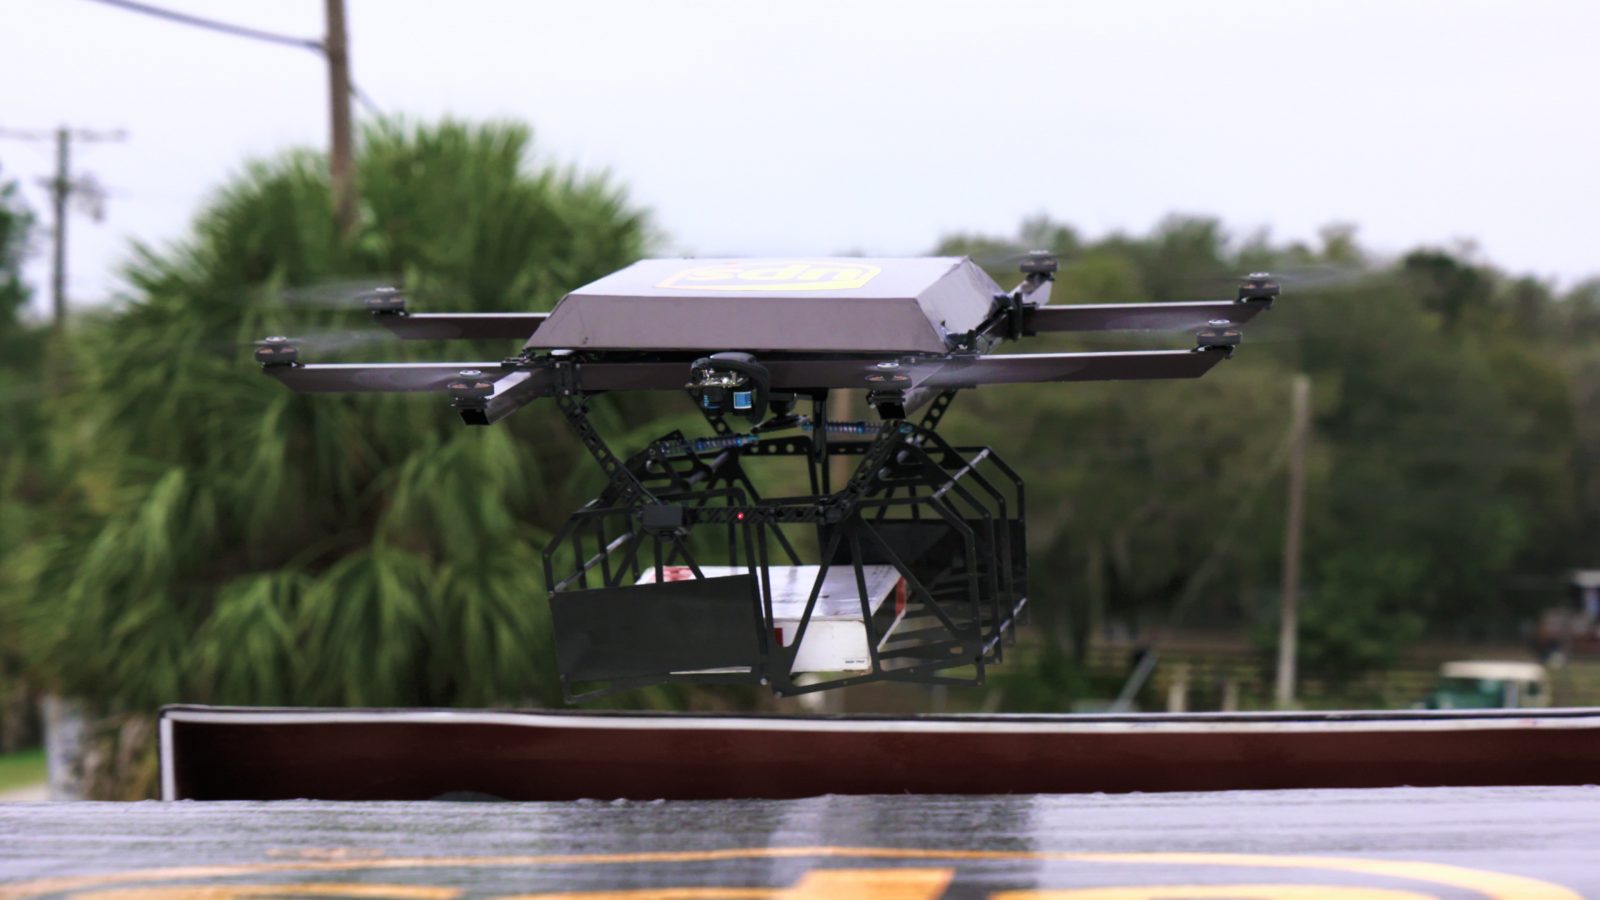 Ups testing drones for deliveries